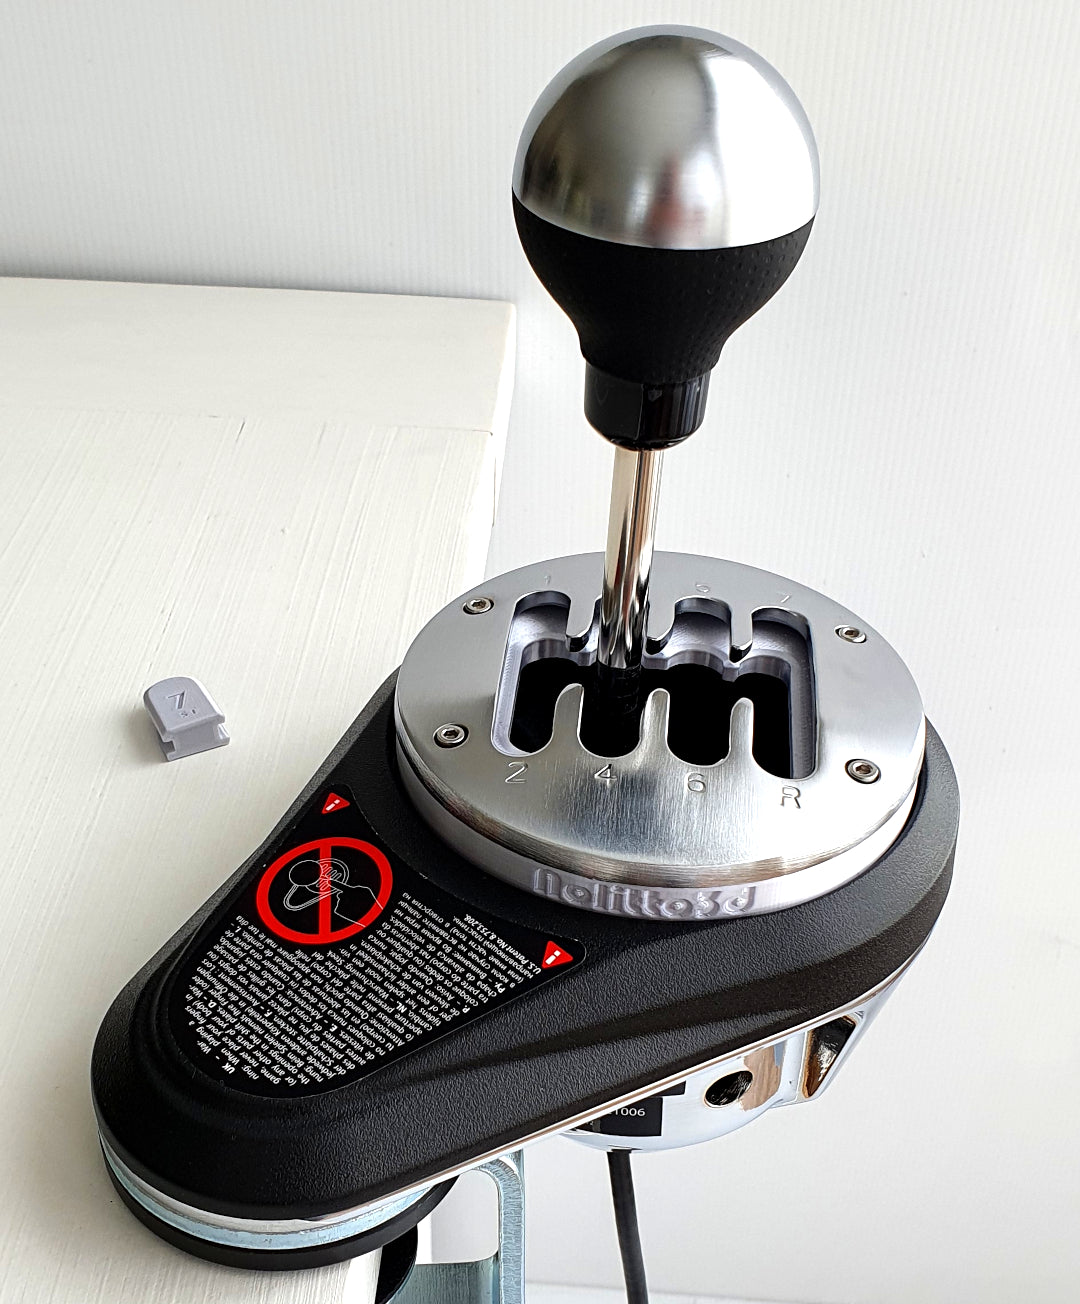 Thrustmaster TH8A Shifter Review 